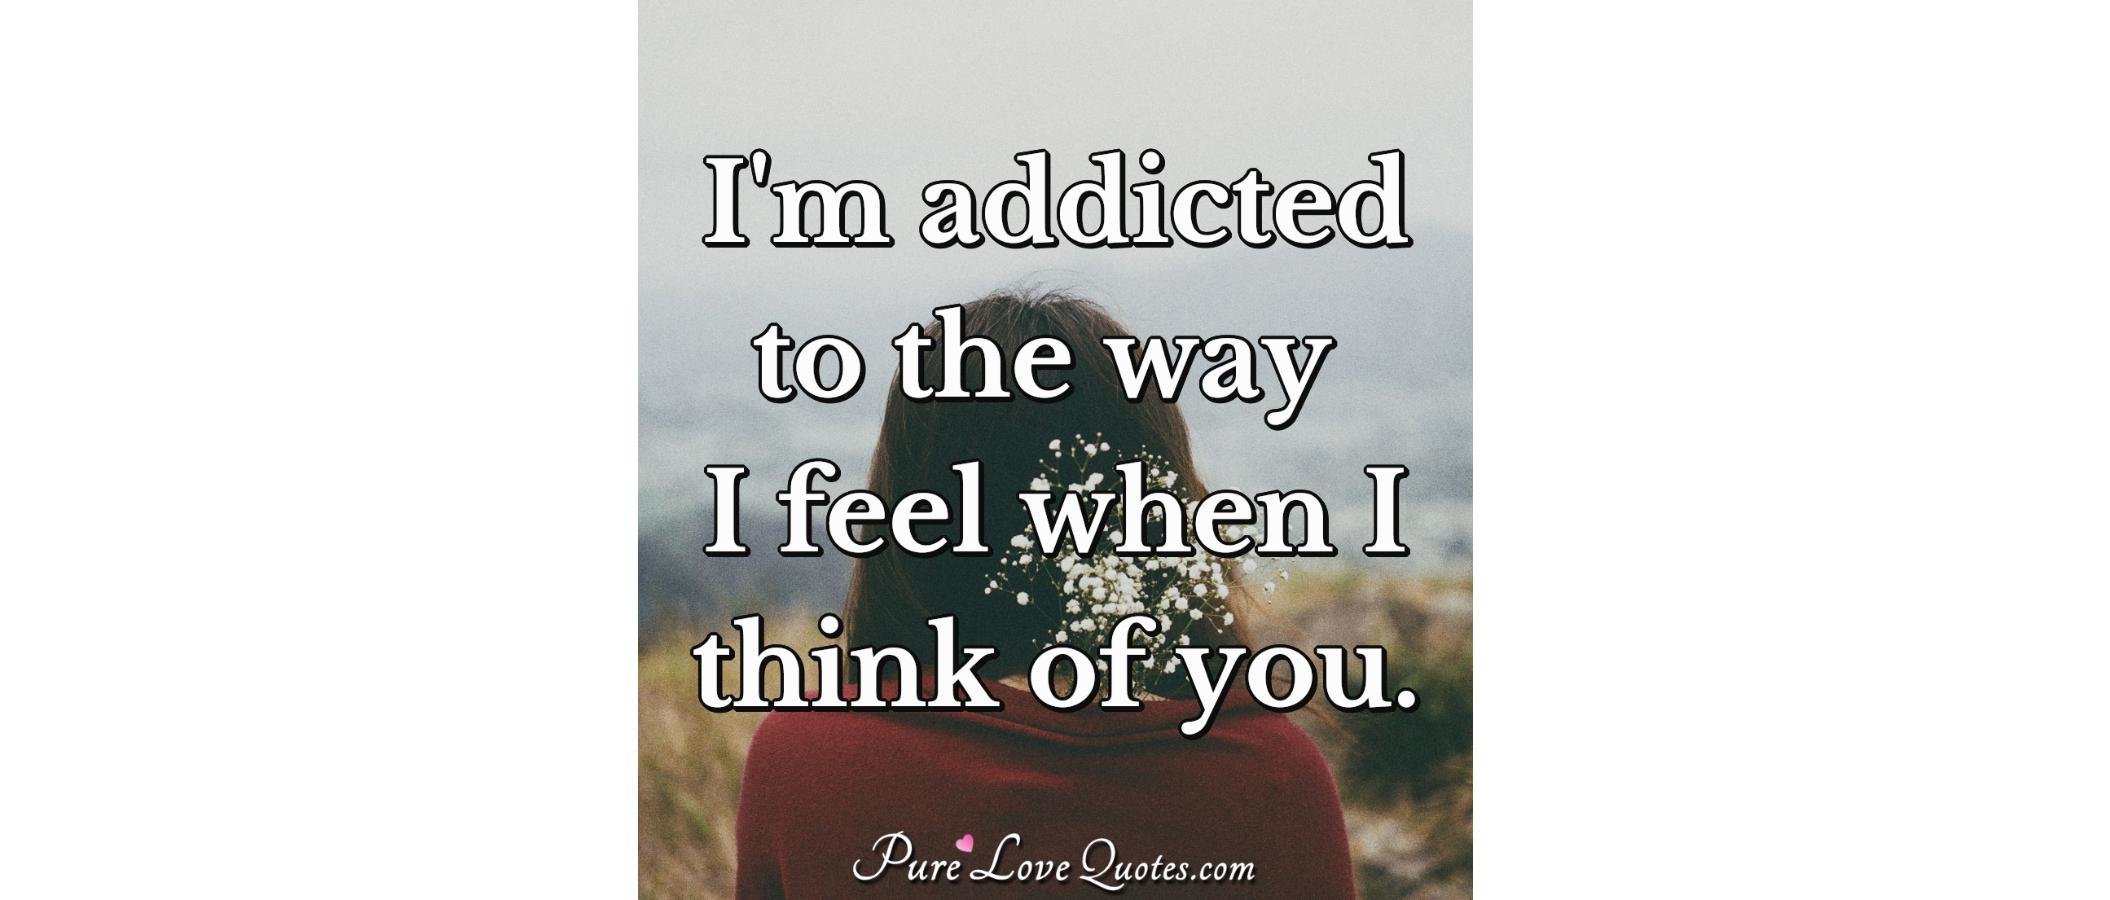 tf im addicted to the way i feel when i think